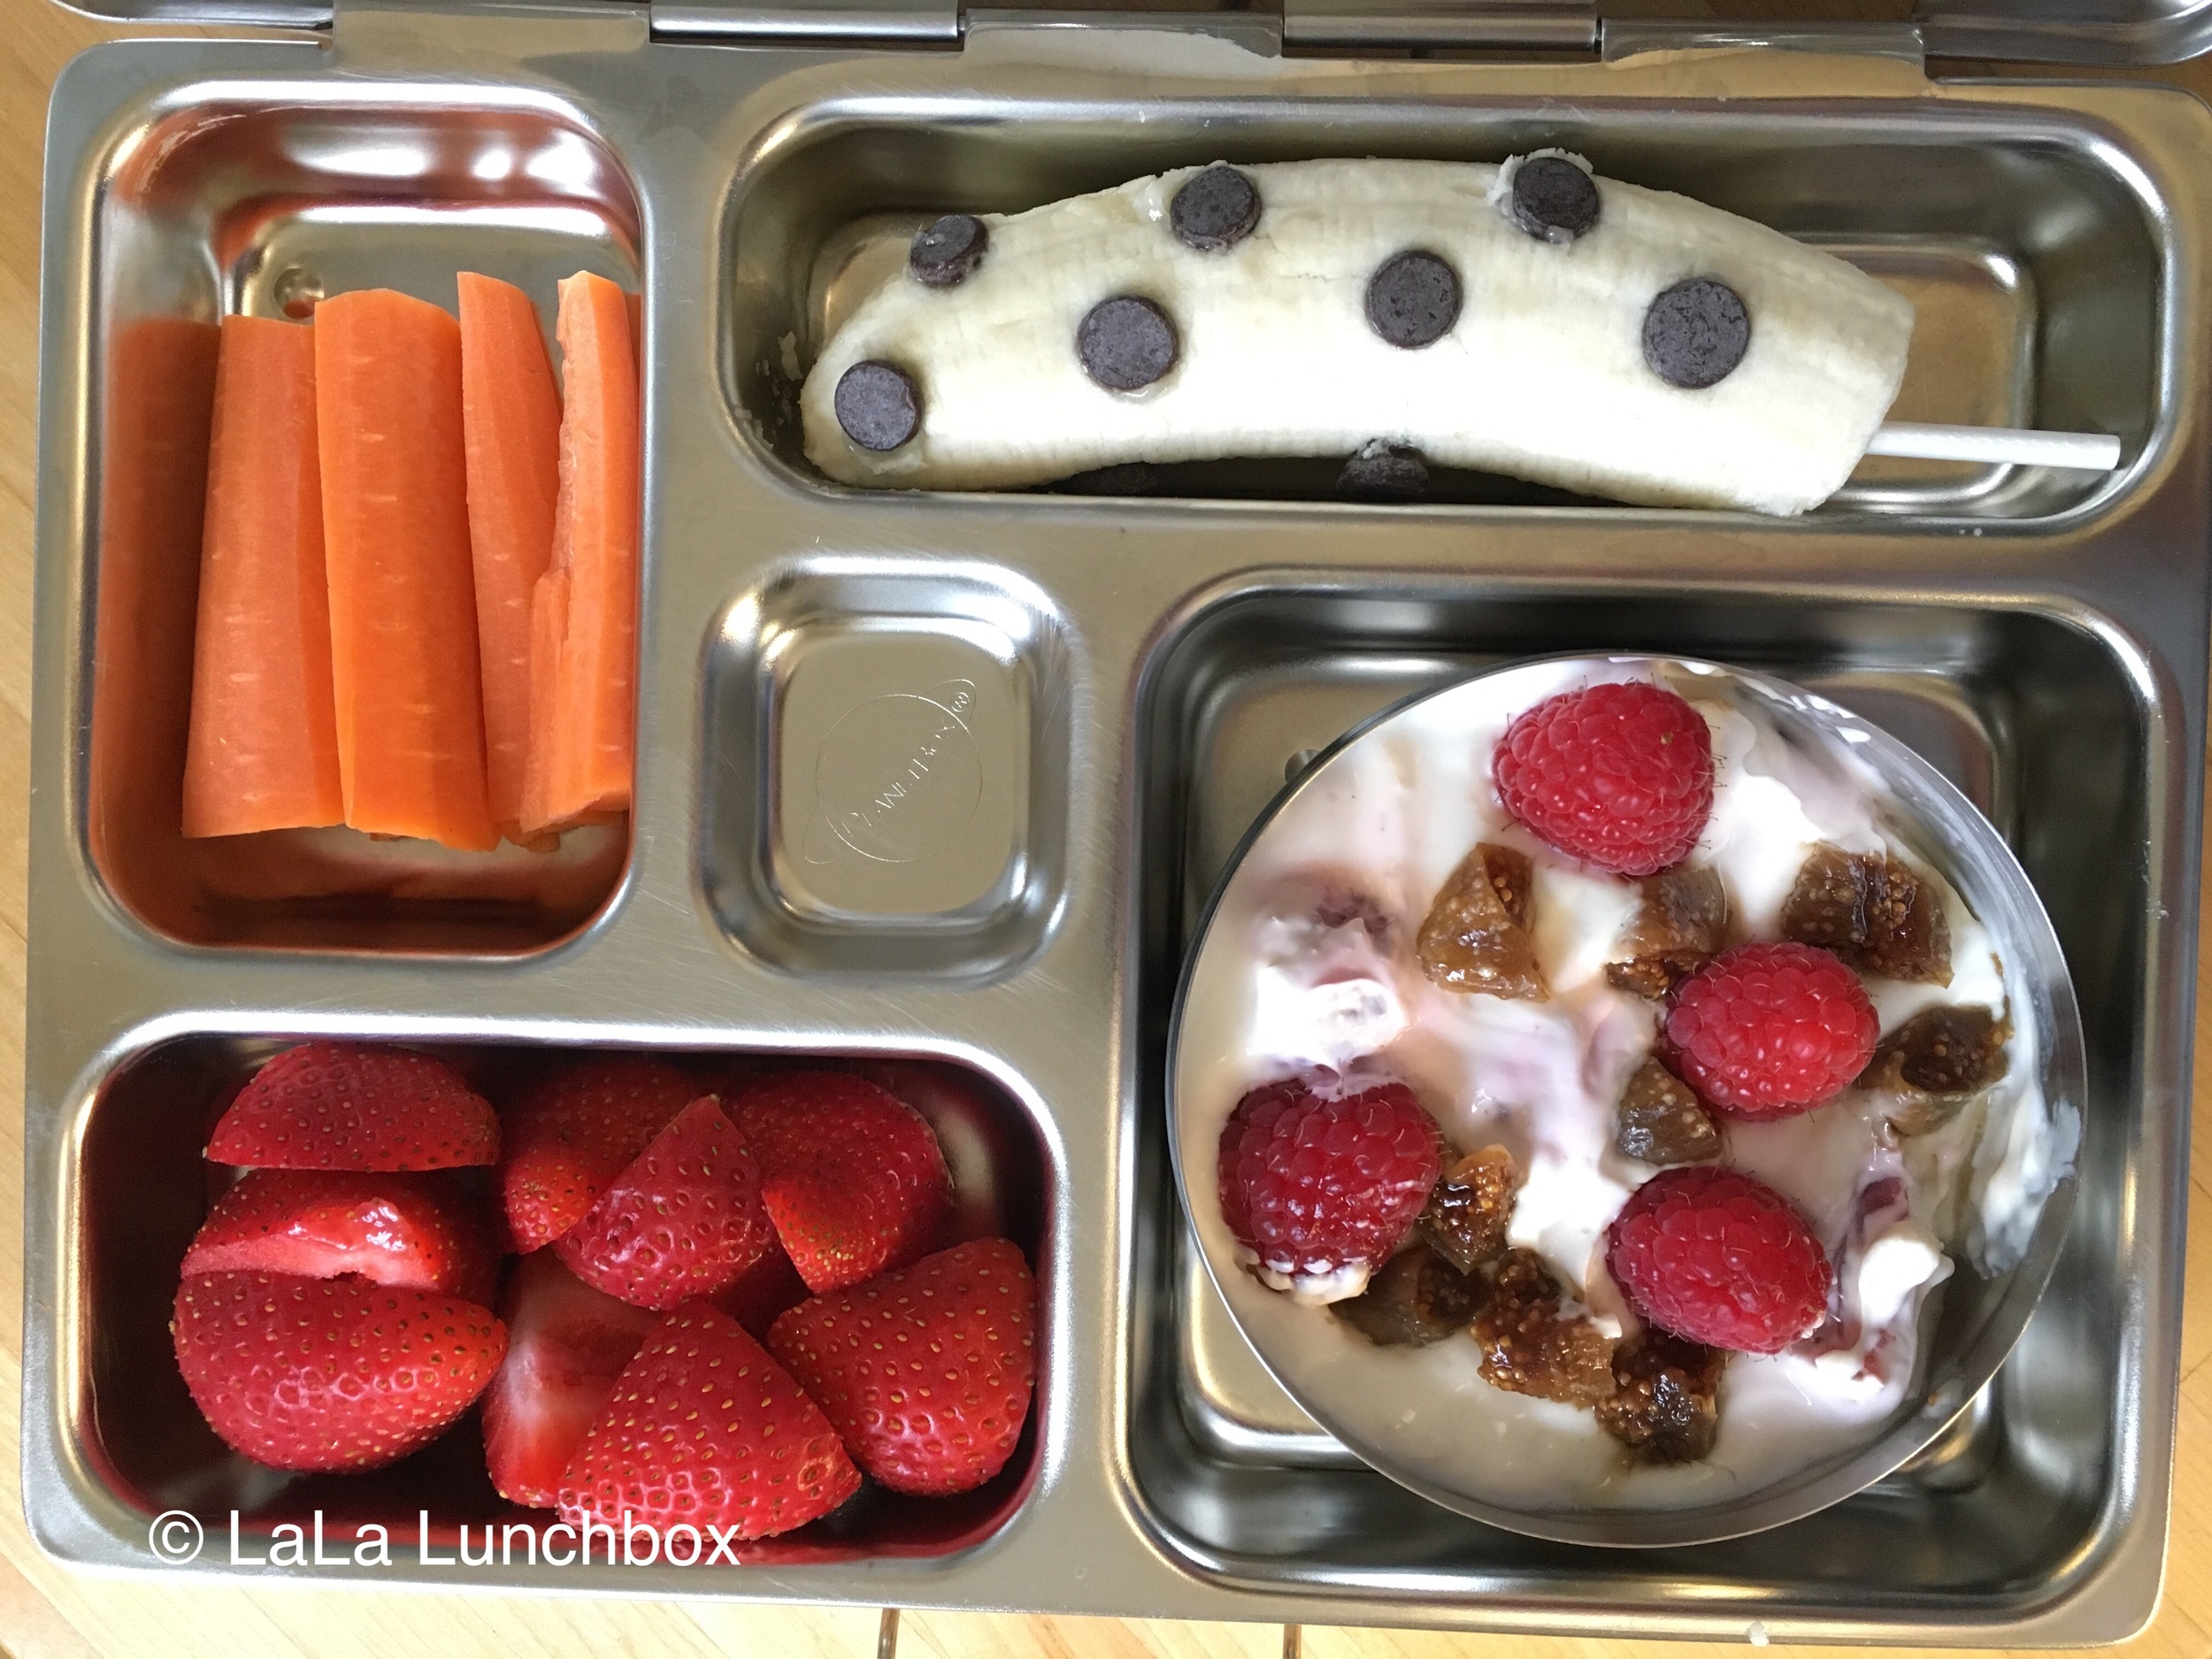 100 Days of Real Food - My kindergartner took her PlanetBox lunch box again  today. It works pretty well for this homemade pizza lunchable combo,  which includes: Plain whole-wheat pizza crusts, tomato